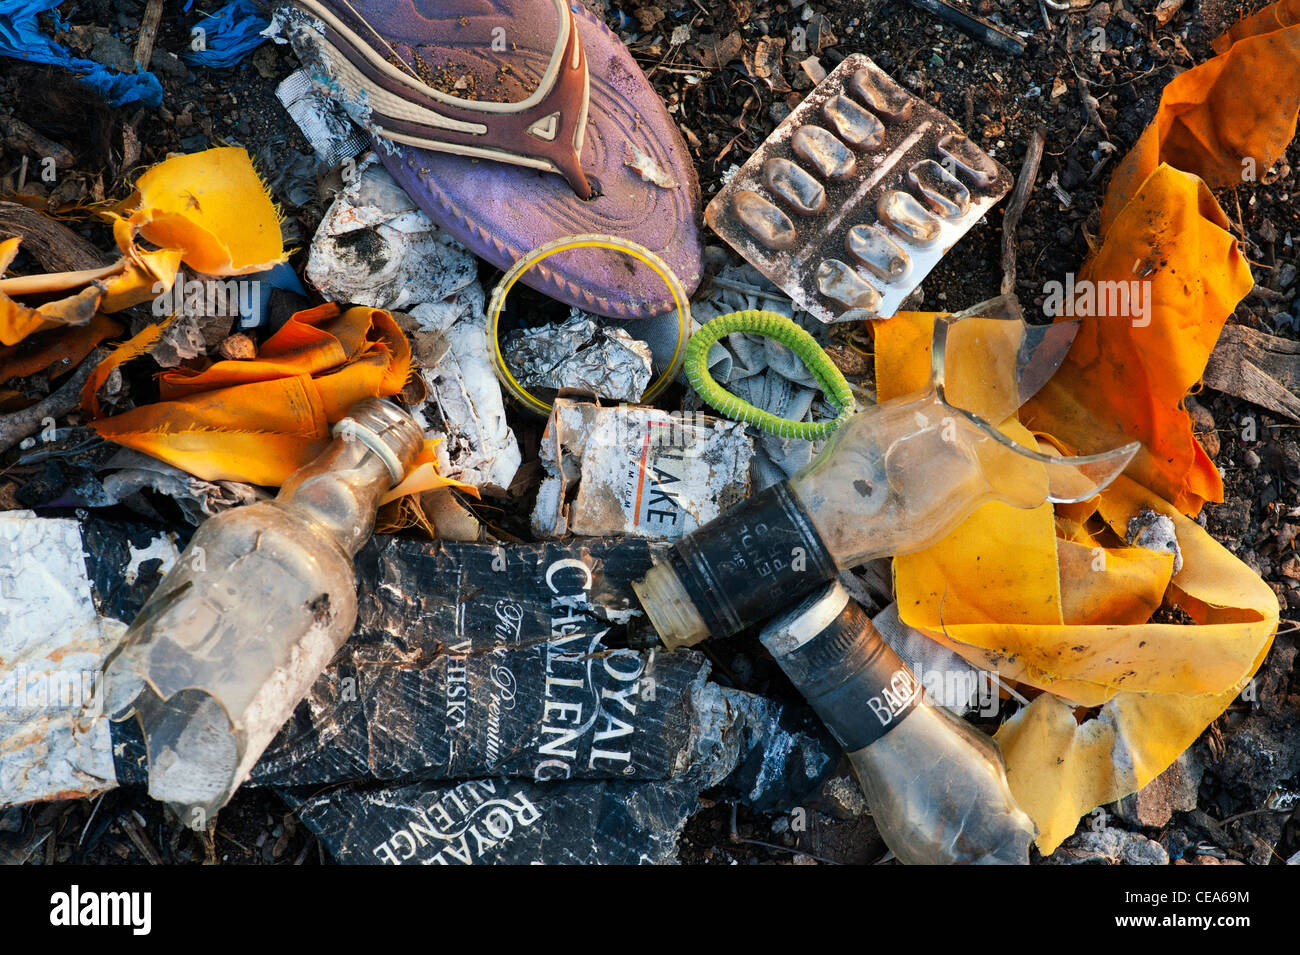 Discarded household waste in the Indian countryside, representing the concept of Indian family social issues. Andhra Pradesh, India Stock Photo